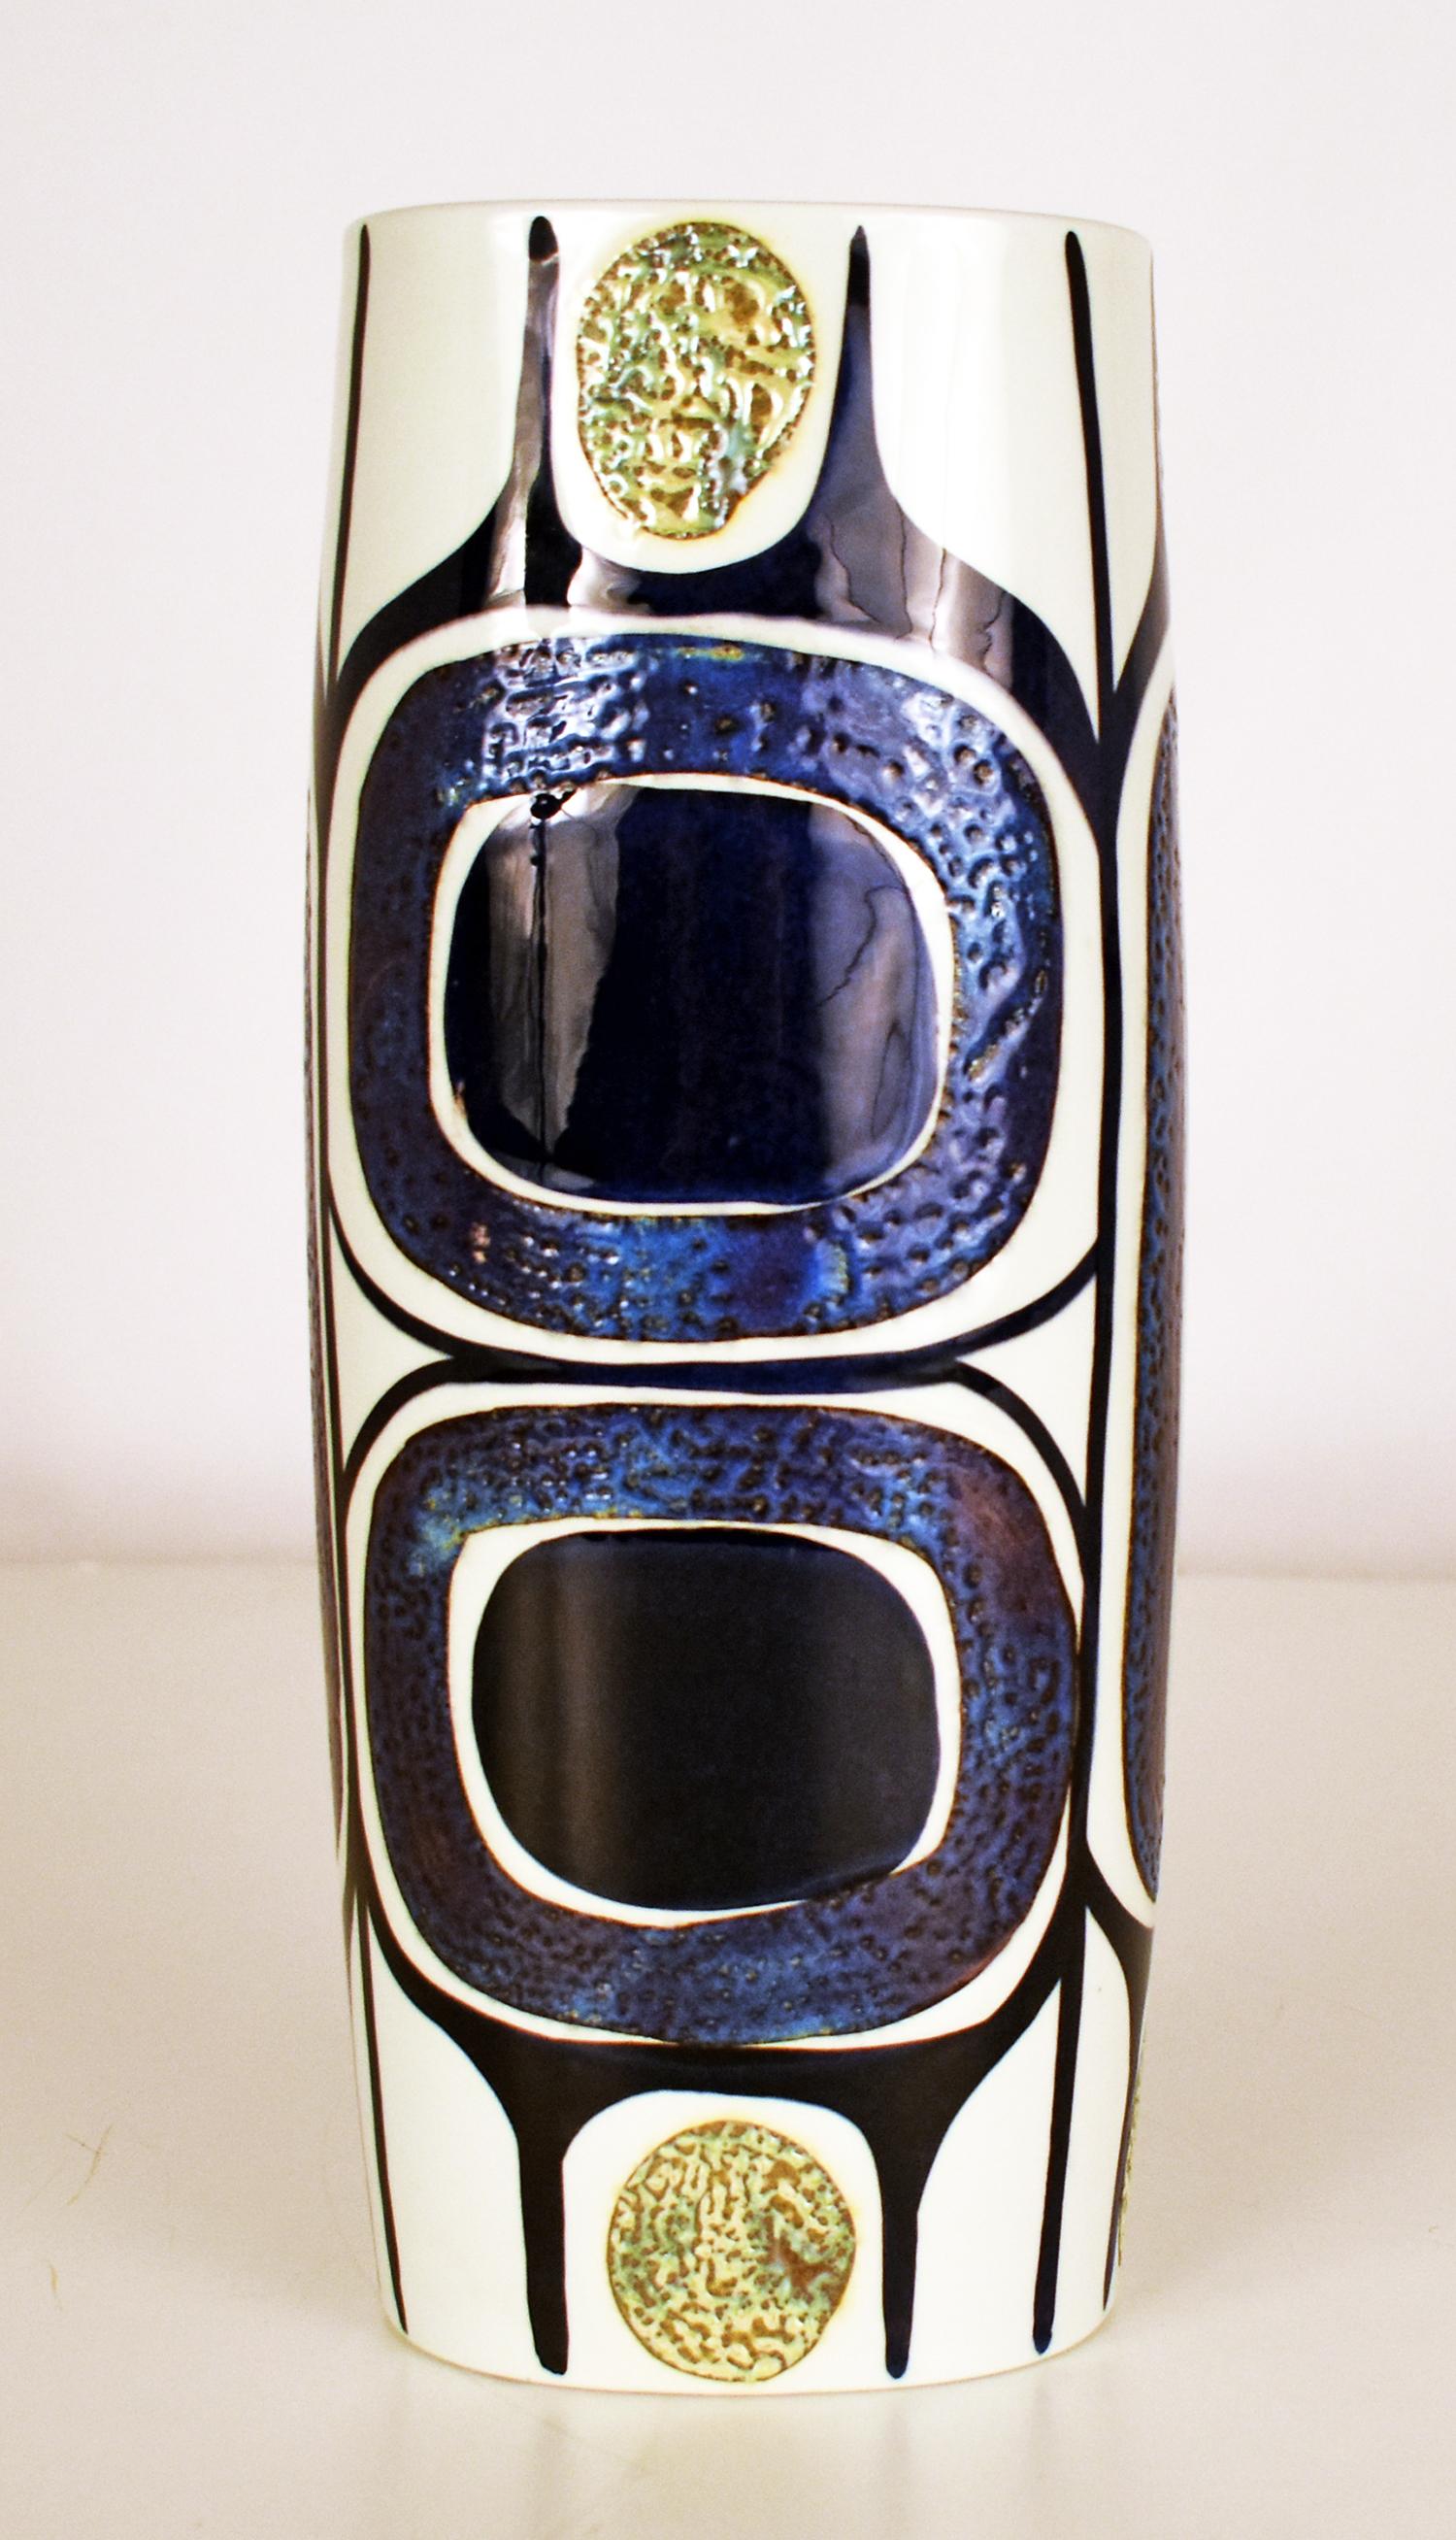 Tall Danish Tenera mid-century vase by Inge-Lise Koefoed for Royal Copenhagen
Tall and eye-catching vase from the Royal Copenhagen Tenera series with gorgeous hand painted decor designed by Inge-Lise Koefoed.
Patterns: Abstract, Geometric
The